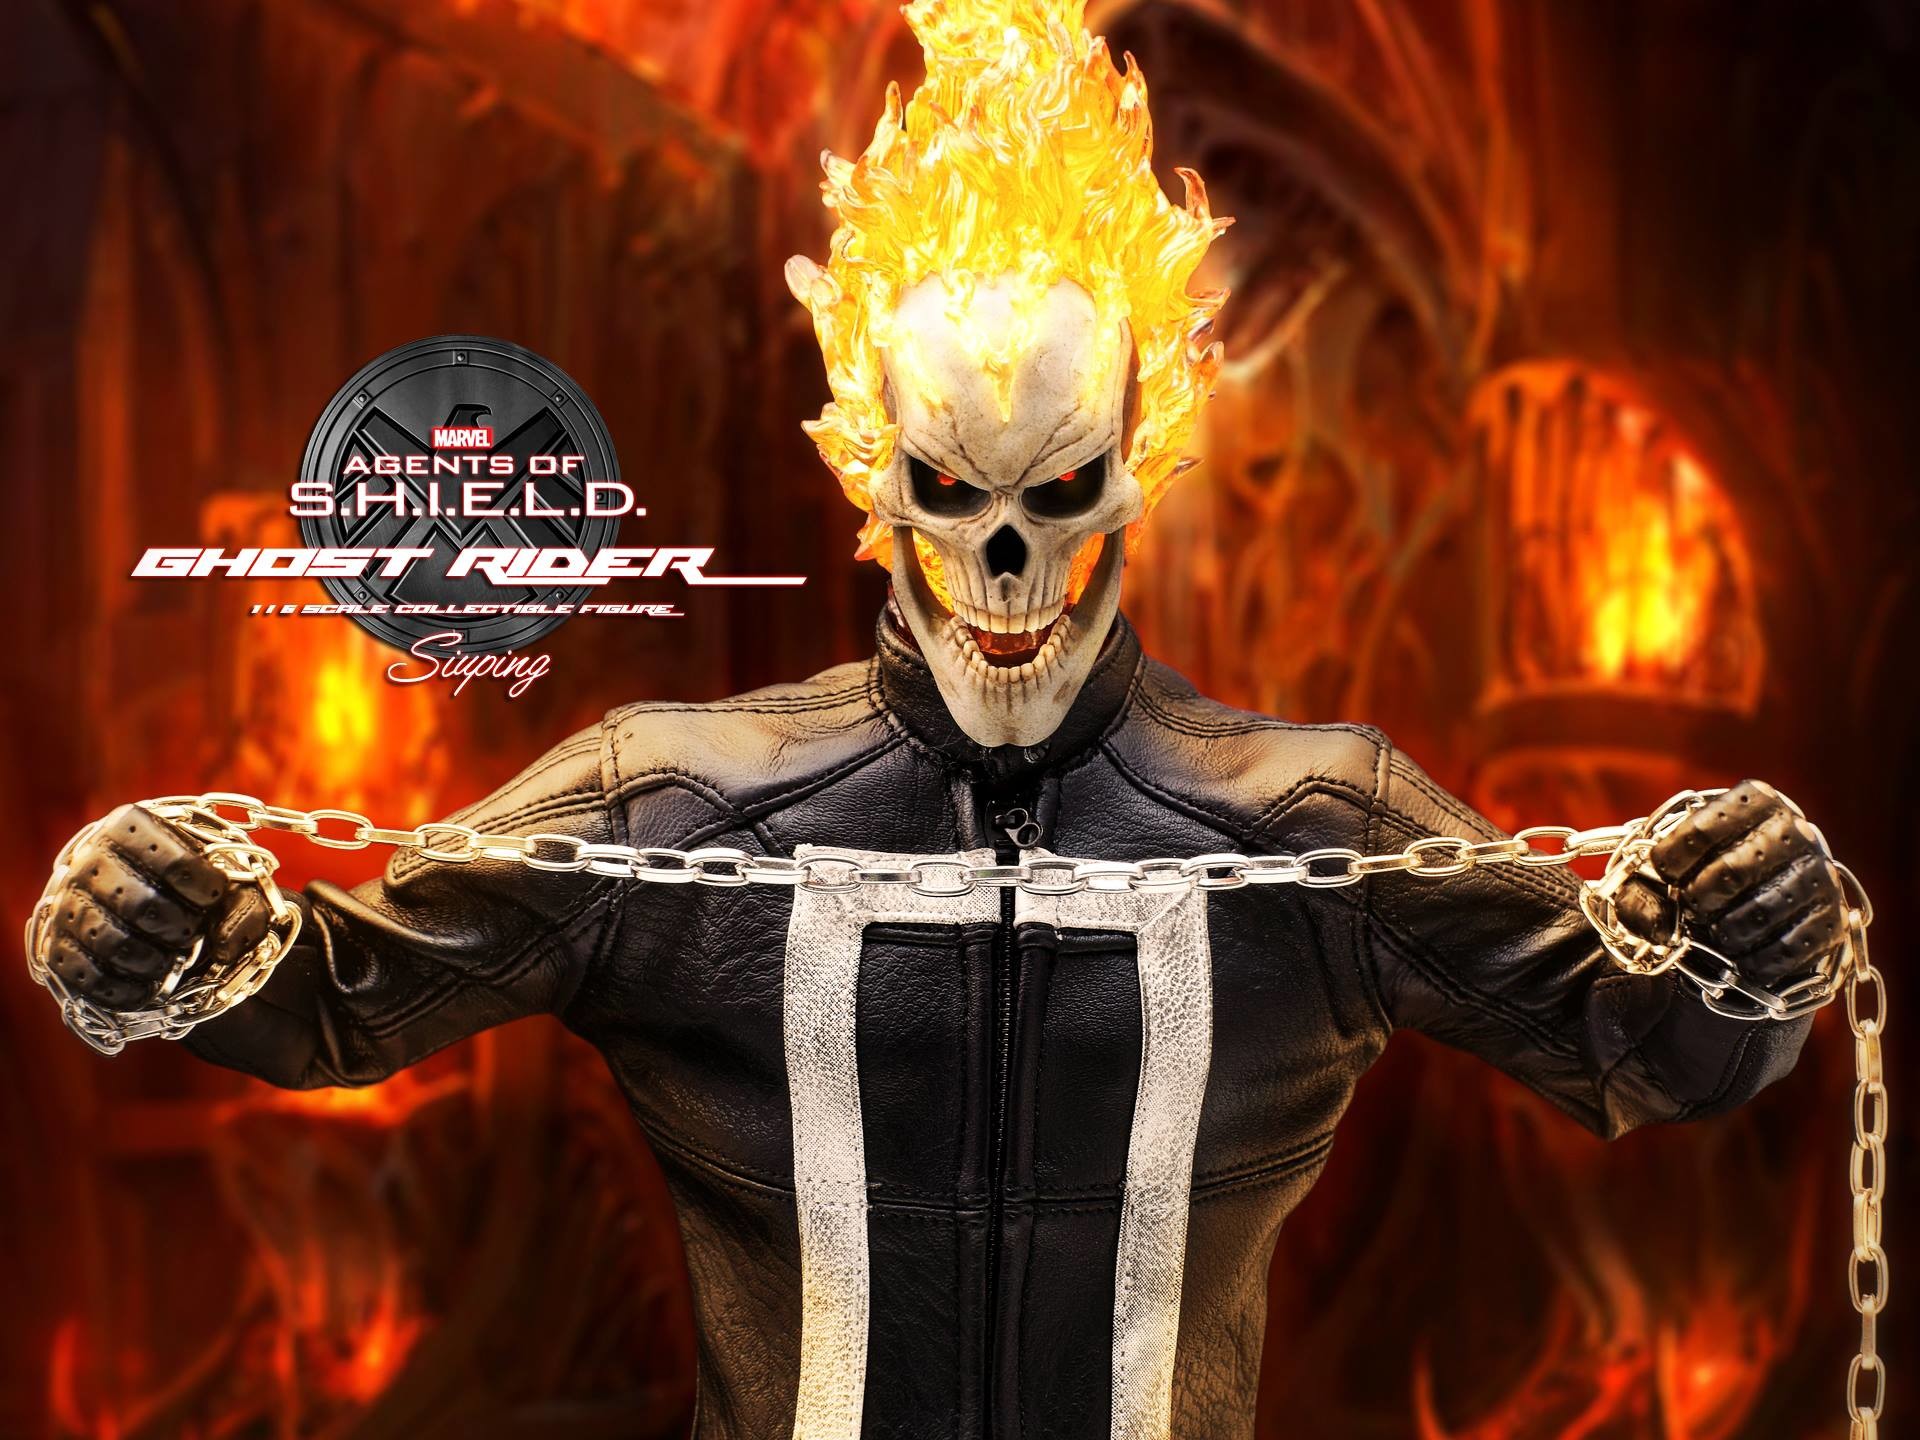 Hot Toys Agents Of S H I E L D Ghost Rider Final Promo Images Hot Toys Agents Of S H I E L D Ghost Rider Final Promo Images